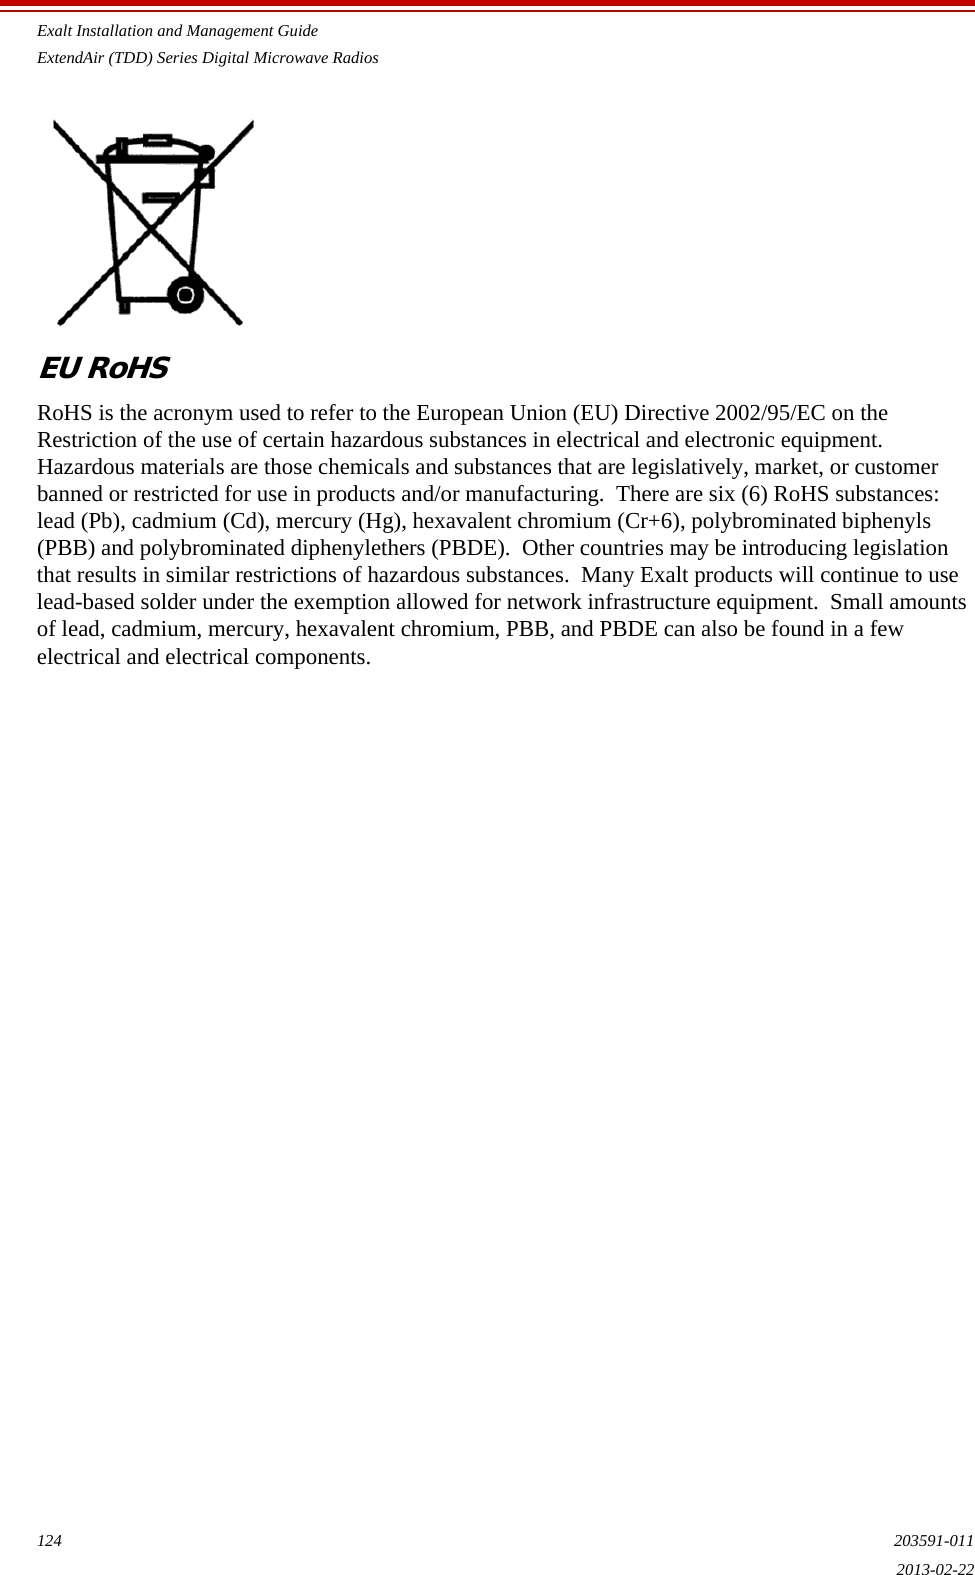 Exalt Installation and Management GuideExtendAir (TDD) Series Digital Microwave Radios124 203591-0112013-02-22EU RoHSRoHS is the acronym used to refer to the European Union (EU) Directive 2002/95/EC on the Restriction of the use of certain hazardous substances in electrical and electronic equipment.  Hazardous materials are those chemicals and substances that are legislatively, market, or customer banned or restricted for use in products and/or manufacturing.  There are six (6) RoHS substances:  lead (Pb), cadmium (Cd), mercury (Hg), hexavalent chromium (Cr+6), polybrominated biphenyls (PBB) and polybrominated diphenylethers (PBDE).  Other countries may be introducing legislation that results in similar restrictions of hazardous substances.  Many Exalt products will continue to use lead-based solder under the exemption allowed for network infrastructure equipment.  Small amounts of lead, cadmium, mercury, hexavalent chromium, PBB, and PBDE can also be found in a few electrical and electrical components.